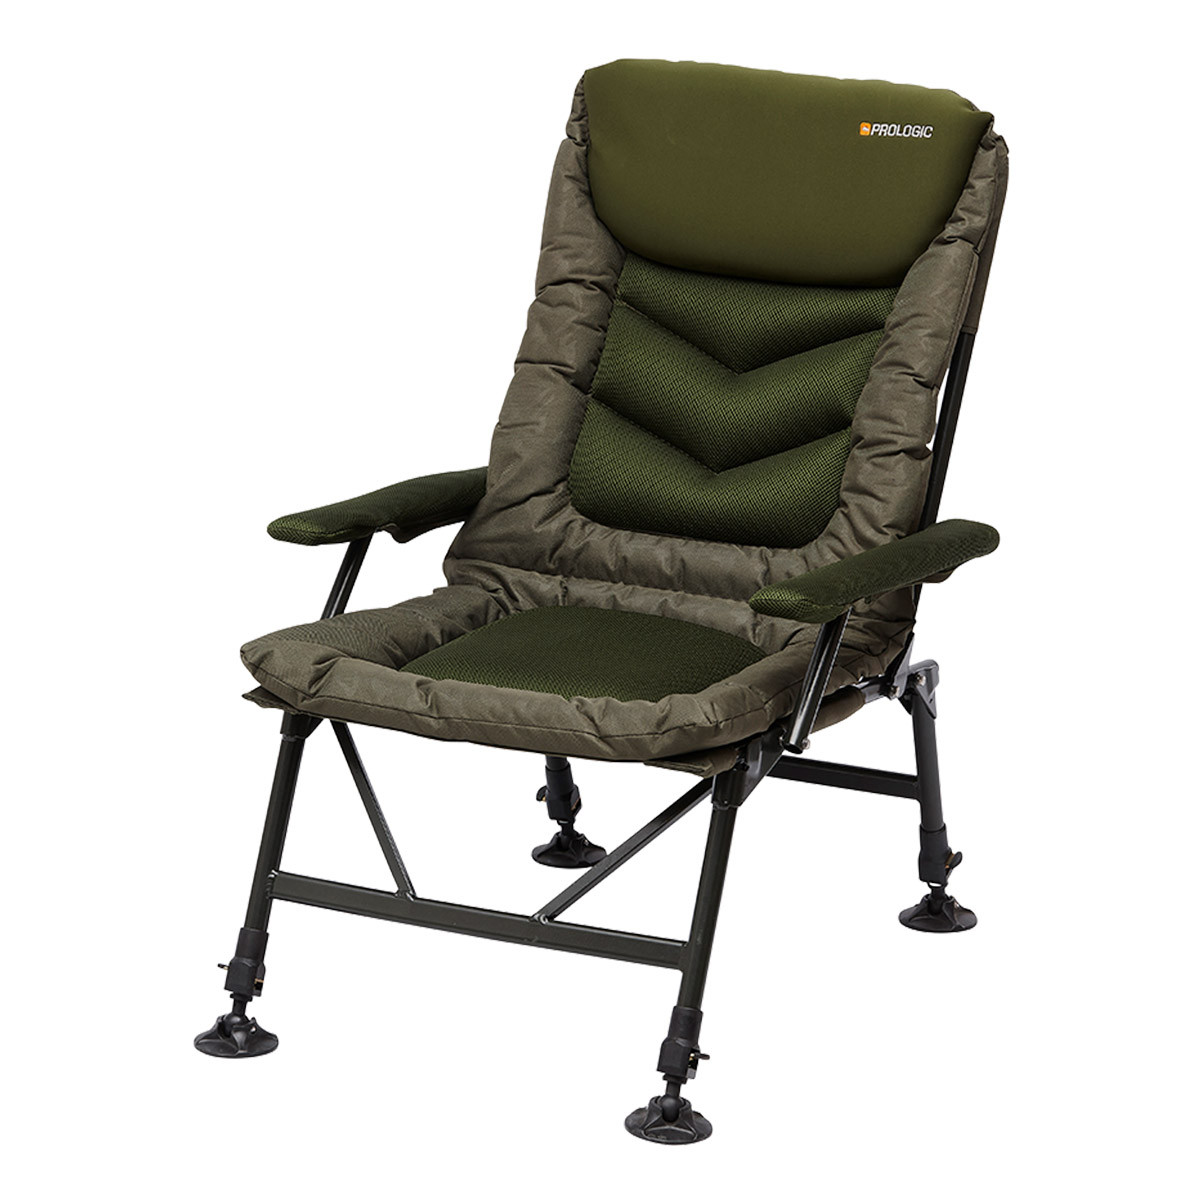 PROLOGIC INSPIRE RELAX RECLINER CHAIR WITH ARMRESTS